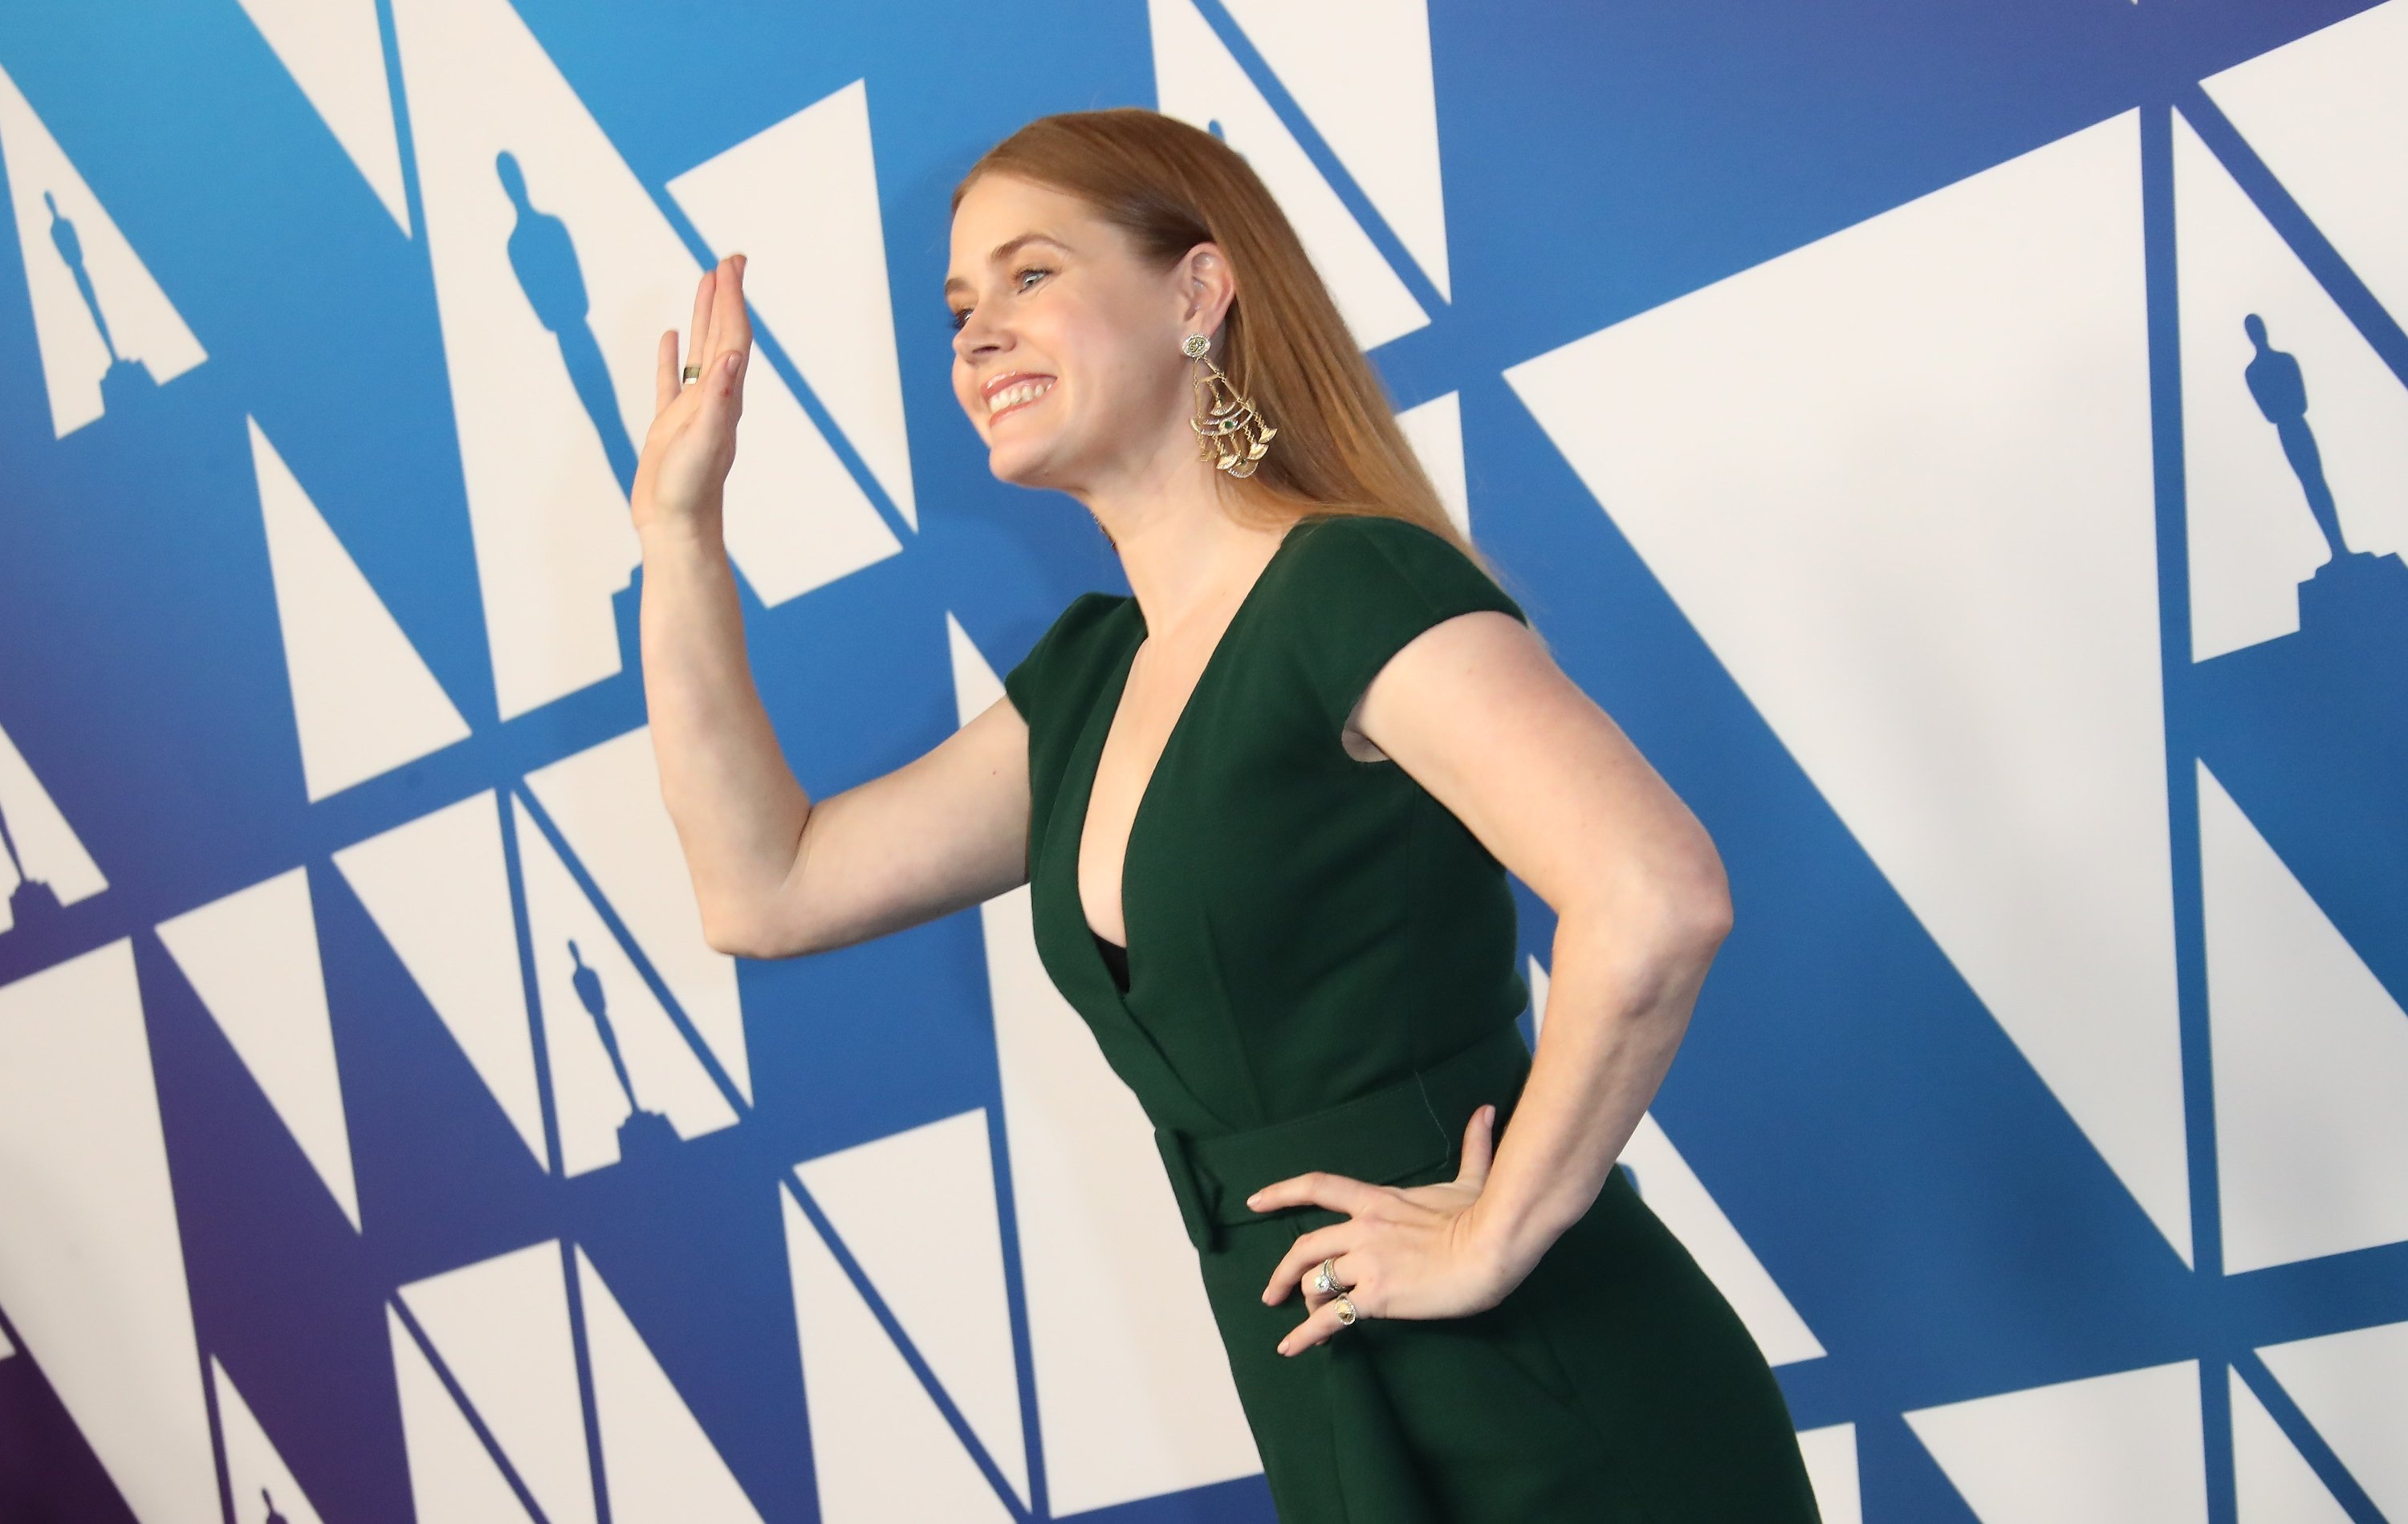 Amy Adams at the 91st Oscars Nominees Luncheon on February 4, 2019 in Beverly Hills, California. | Photo: Getty Images